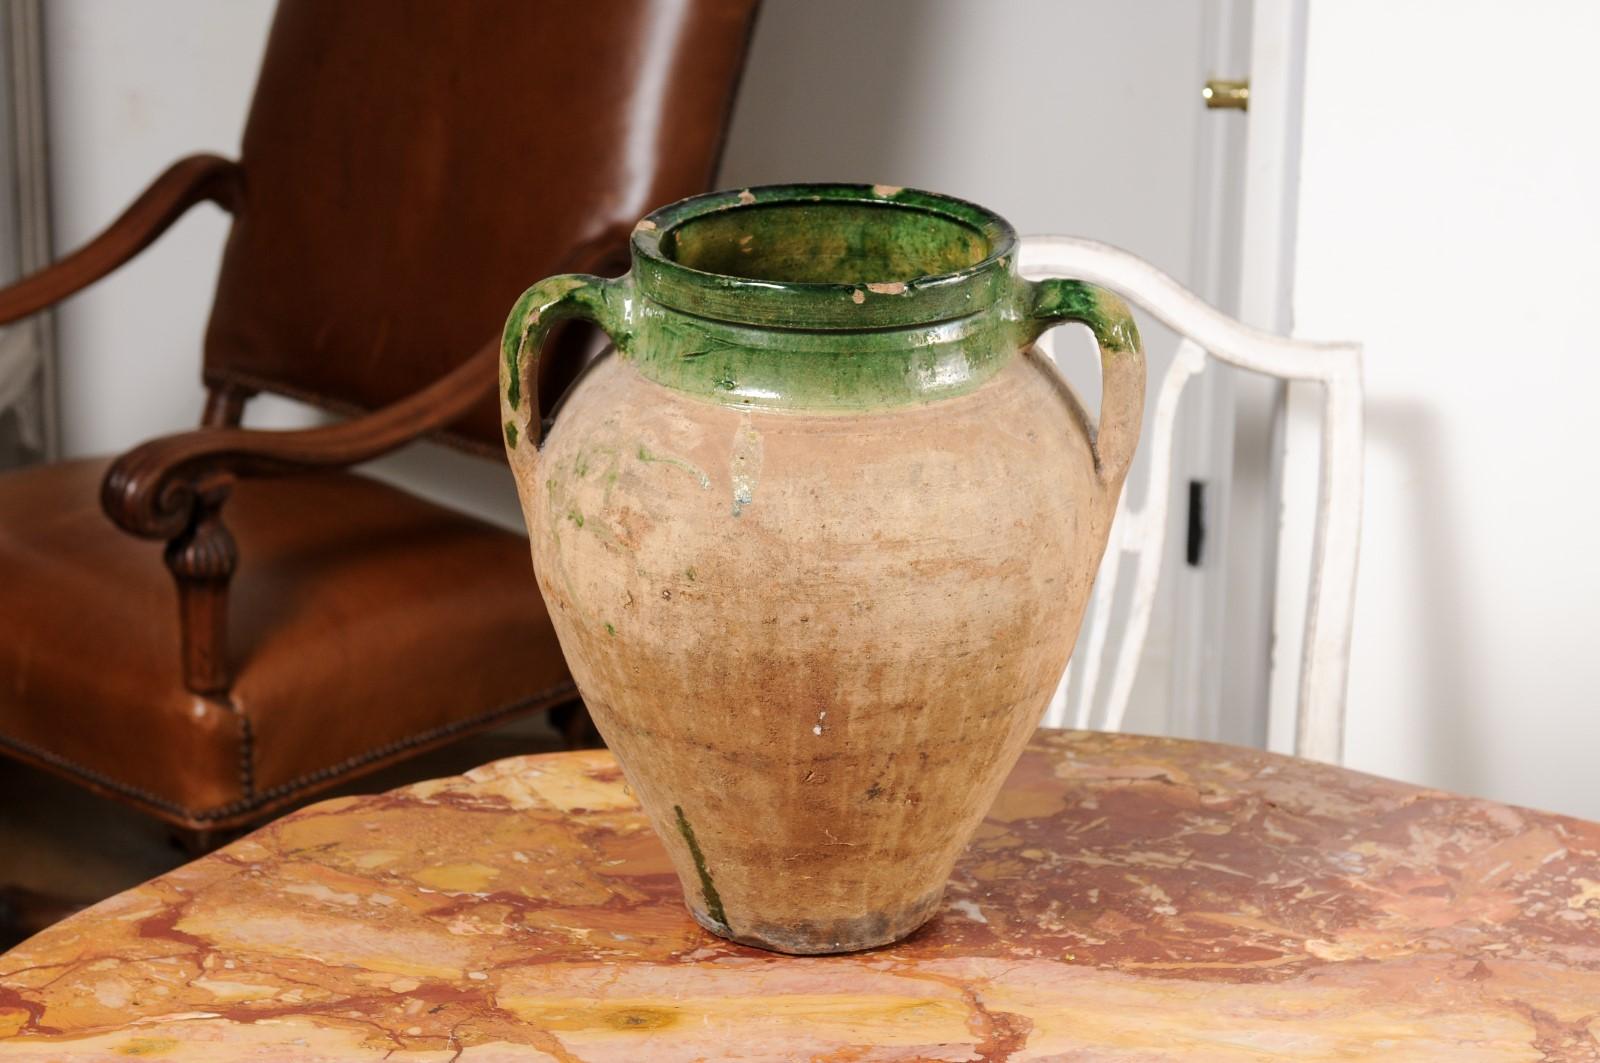 English Rustic 1930s Terracotta Olive Oil Jar Circa 1930 with Green Glazed Top For Sale 5